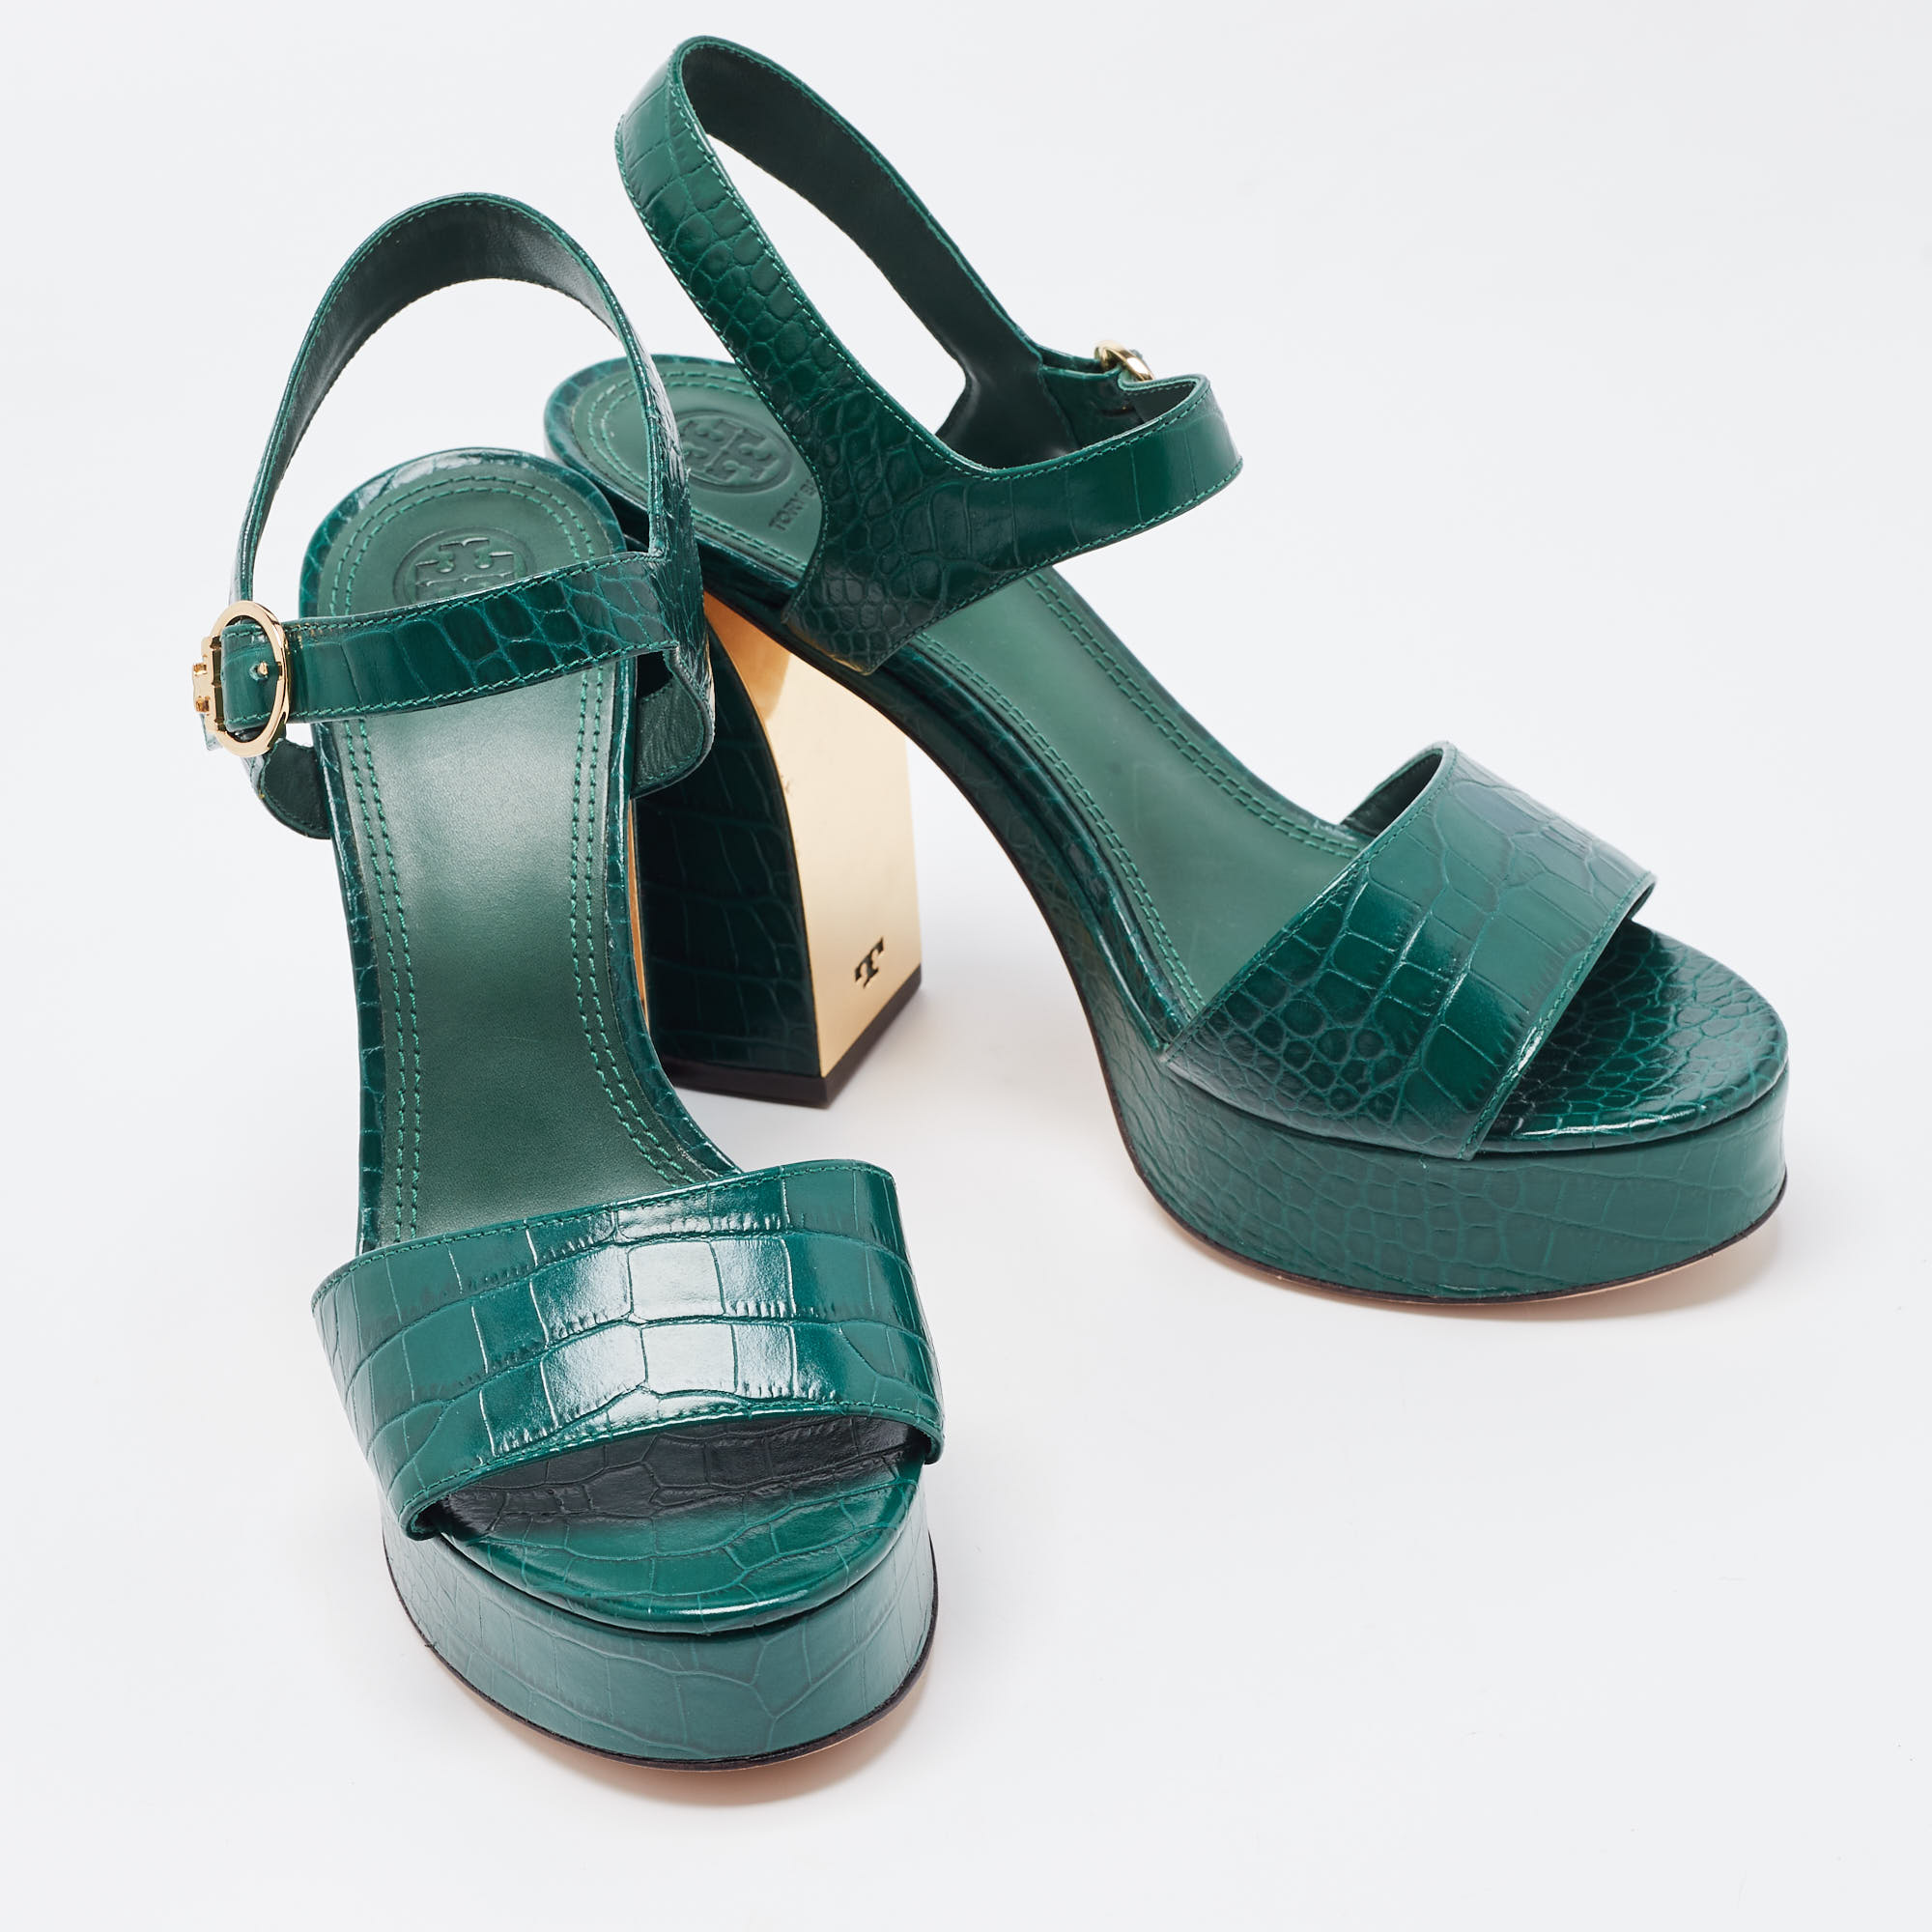 Tory Burch Green Croc Embossed Leather Martine Platform Sandals Size 40